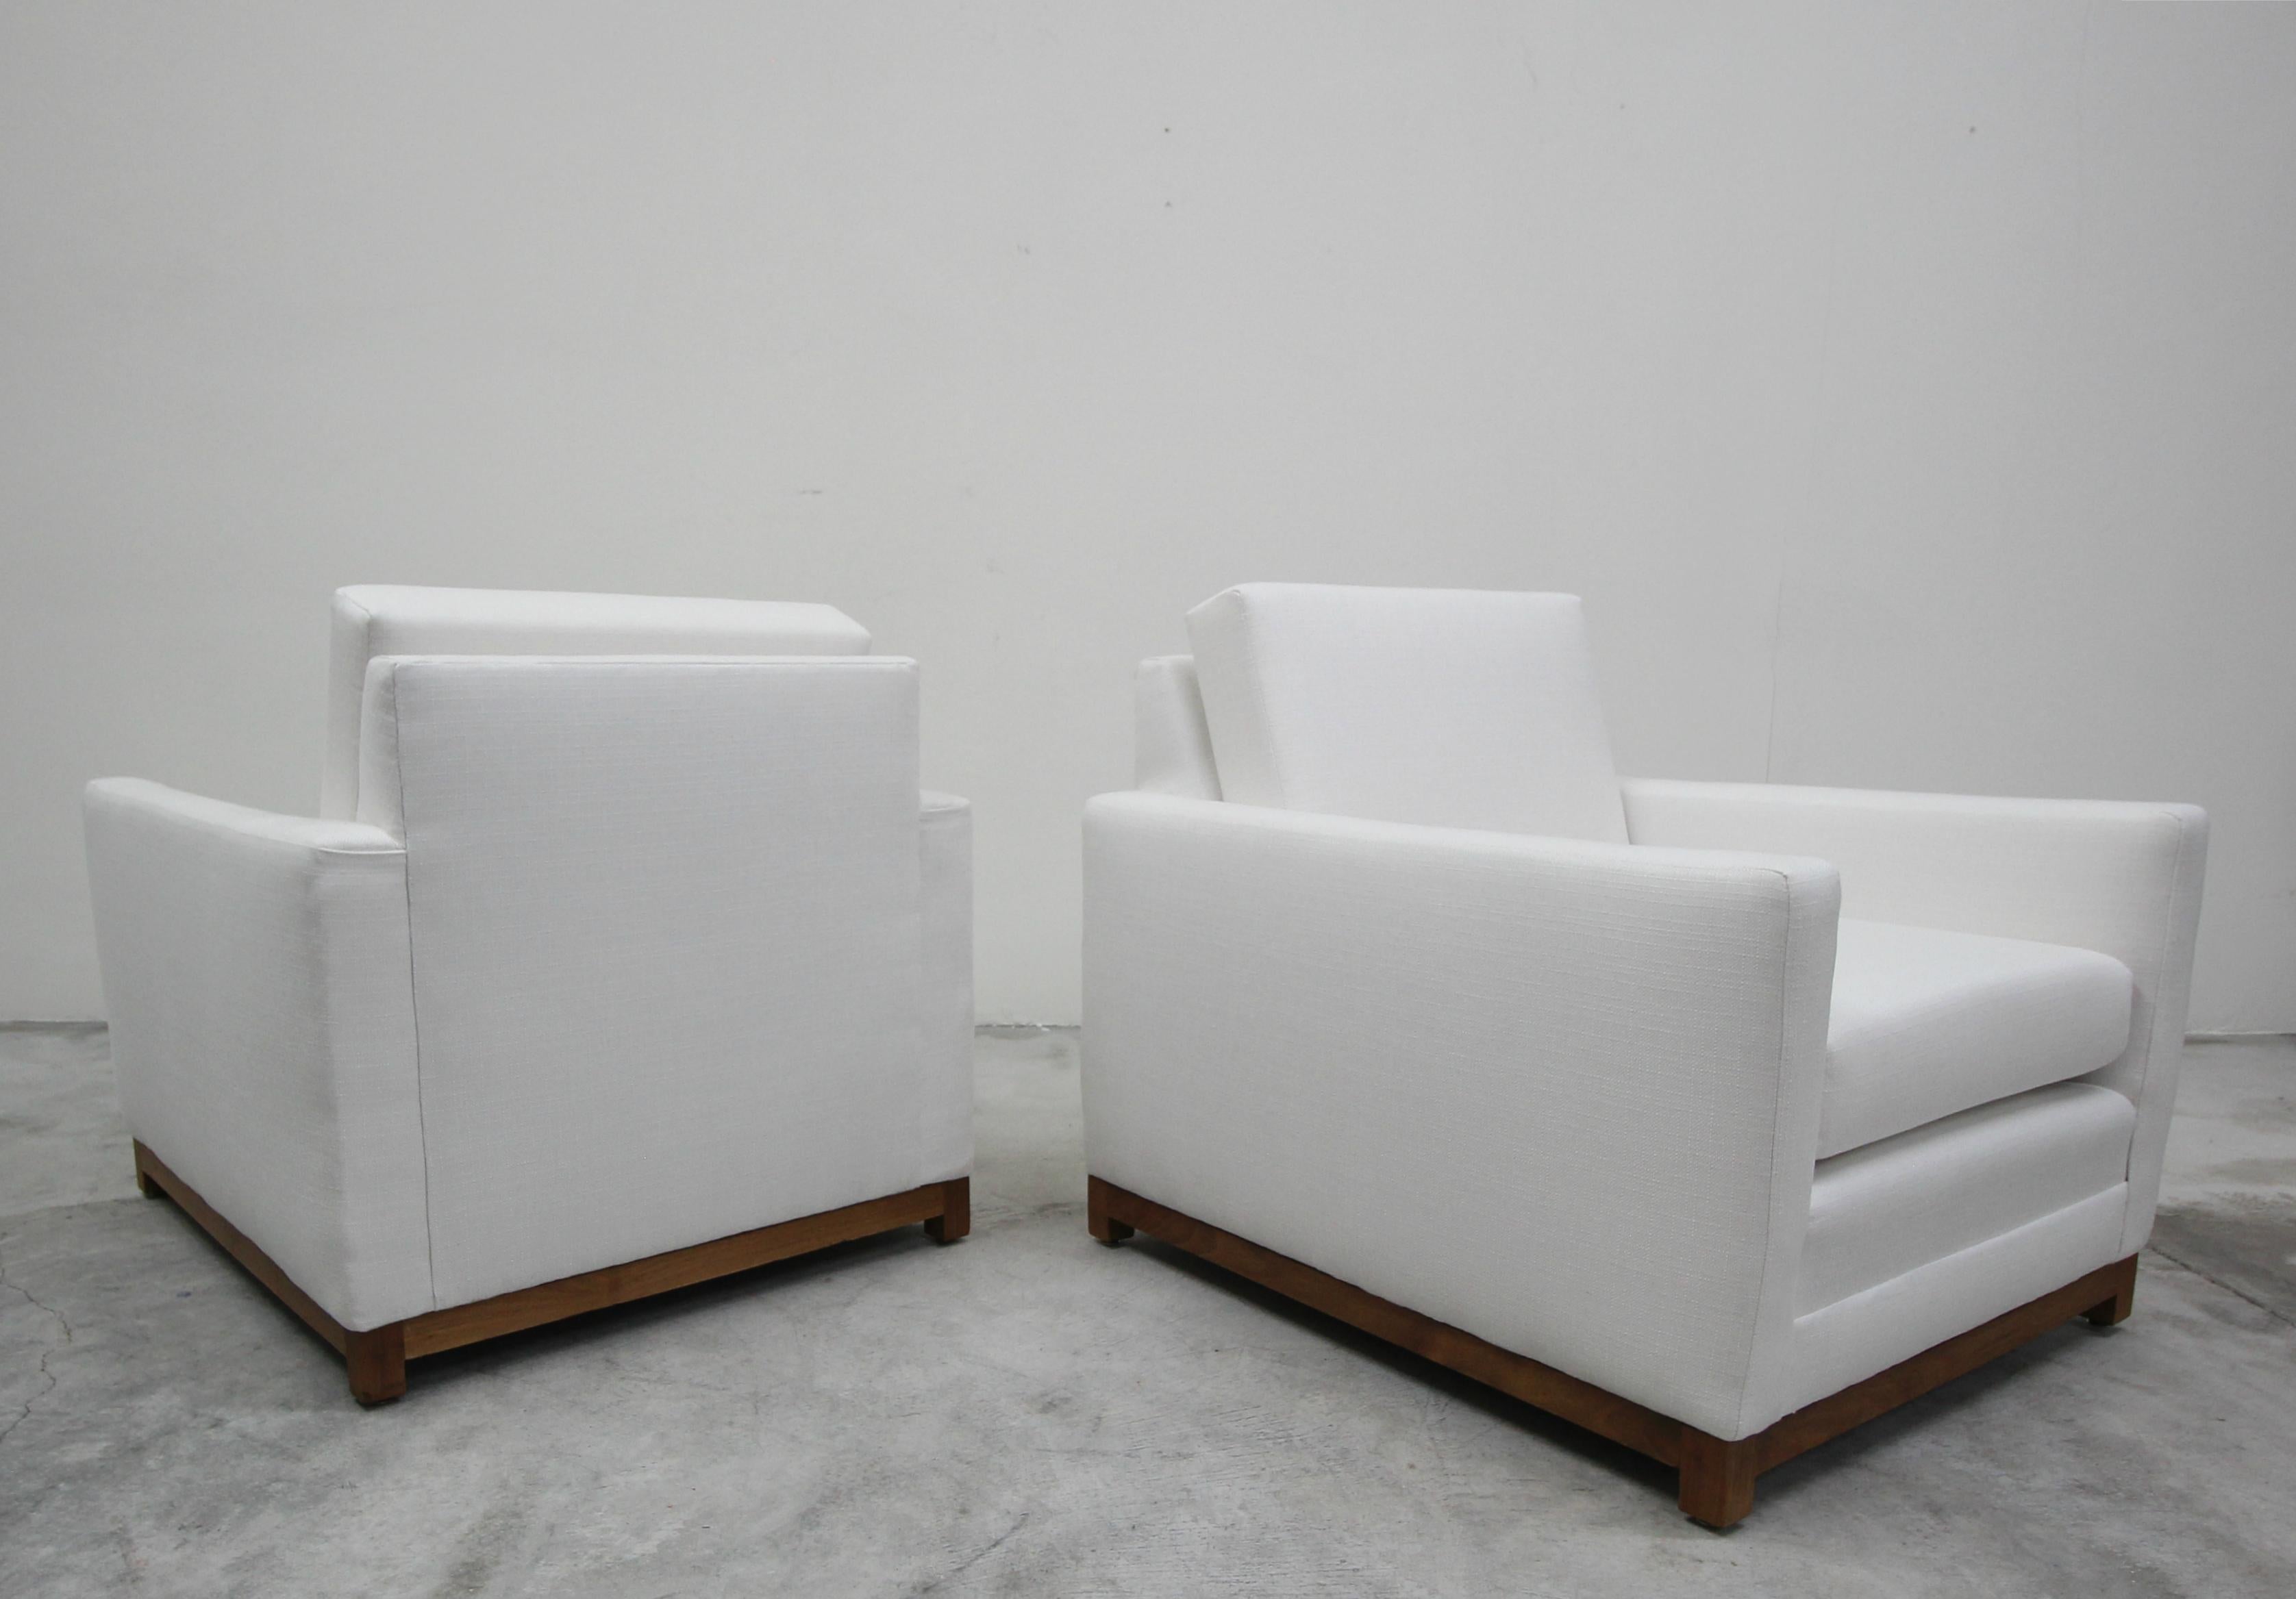 This is a beautifully uncomplex pair of midcentury cube style chairs upon solid teak bases. The simplicity of these chairs would make them a perfect addition to any Minimalist decor.

The chairs have been professionally reupholstered. The frames